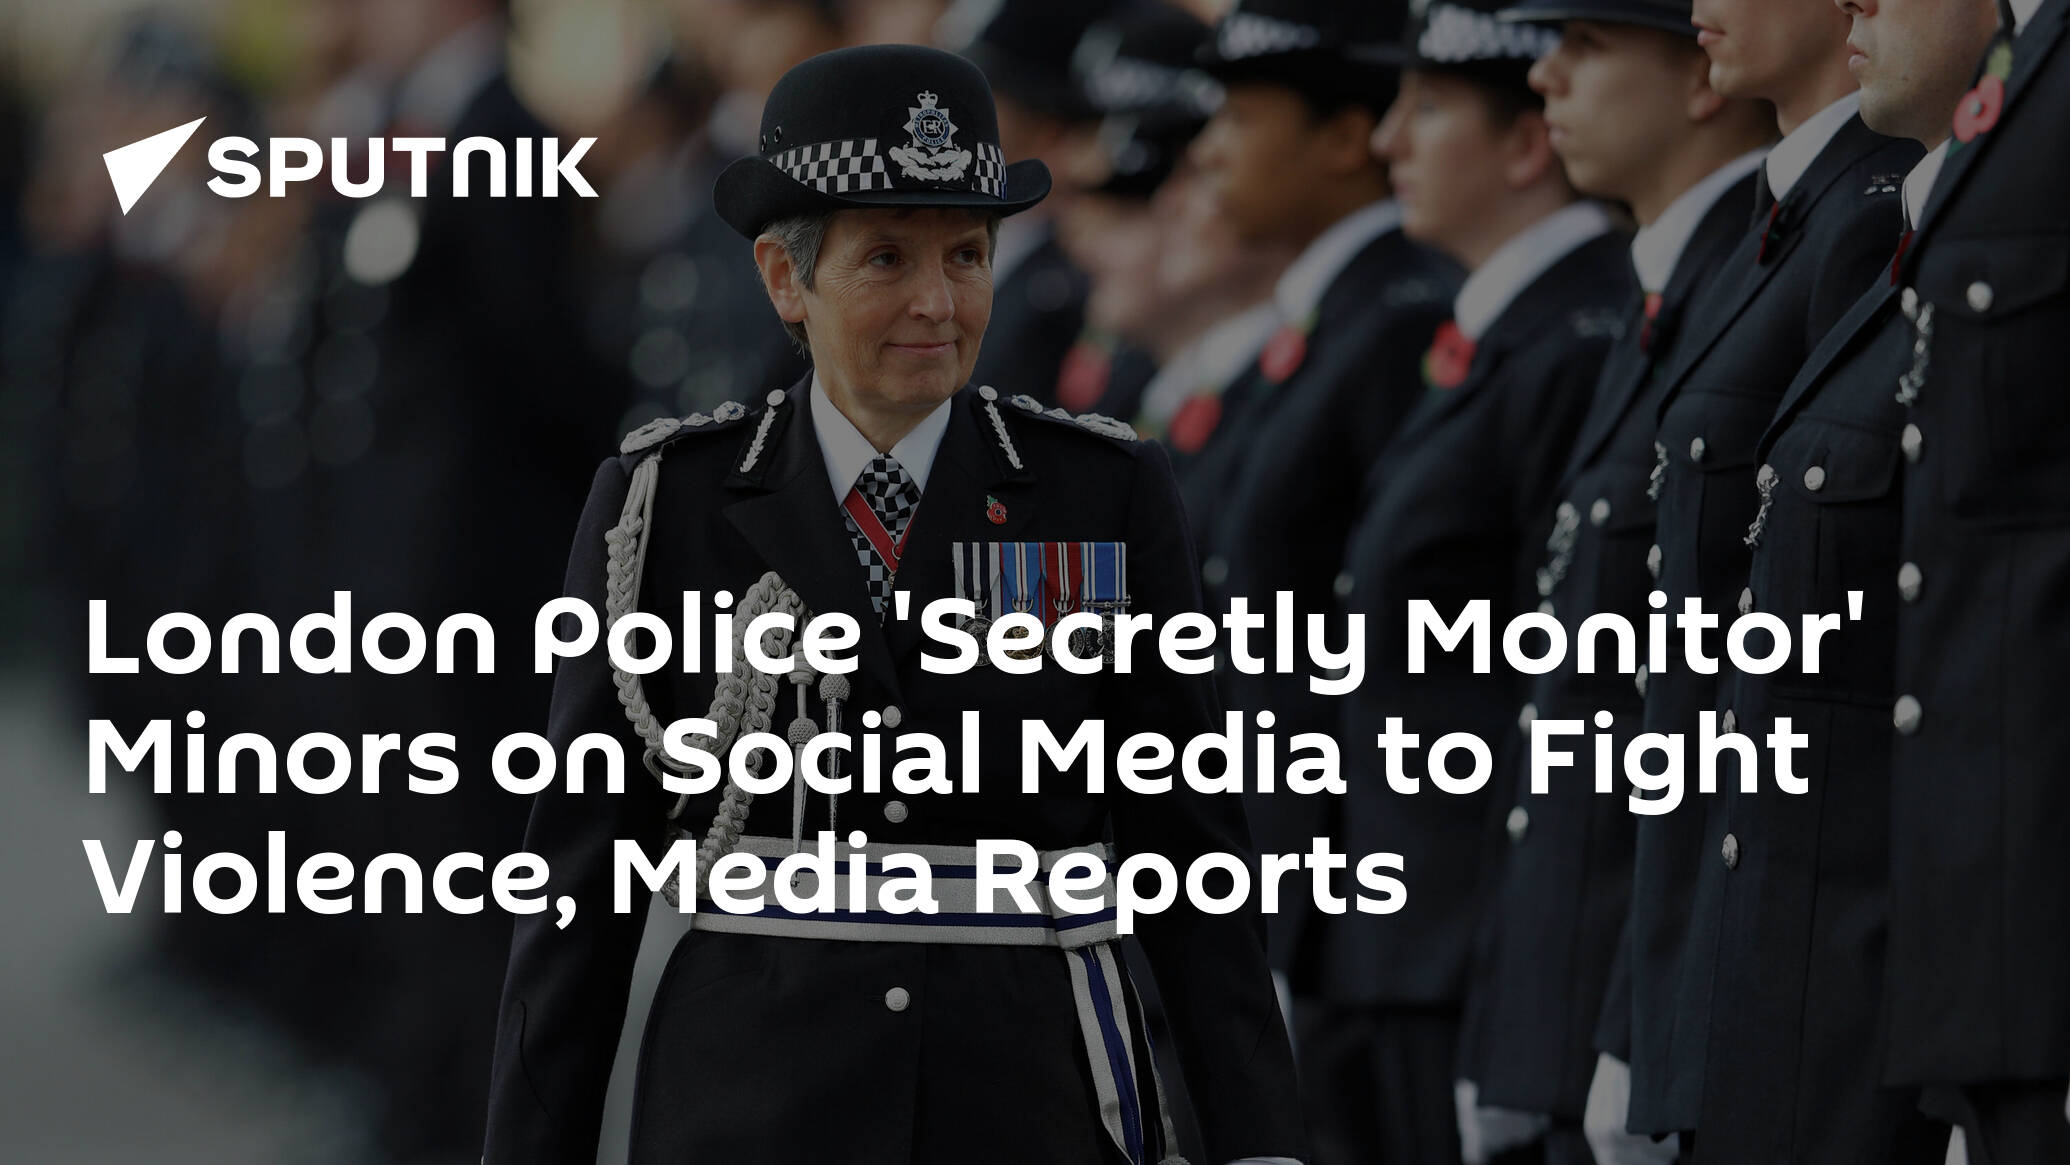 London Police 'Secretly Monitor' Minors on Social Media to Fight Violence, Media Reports